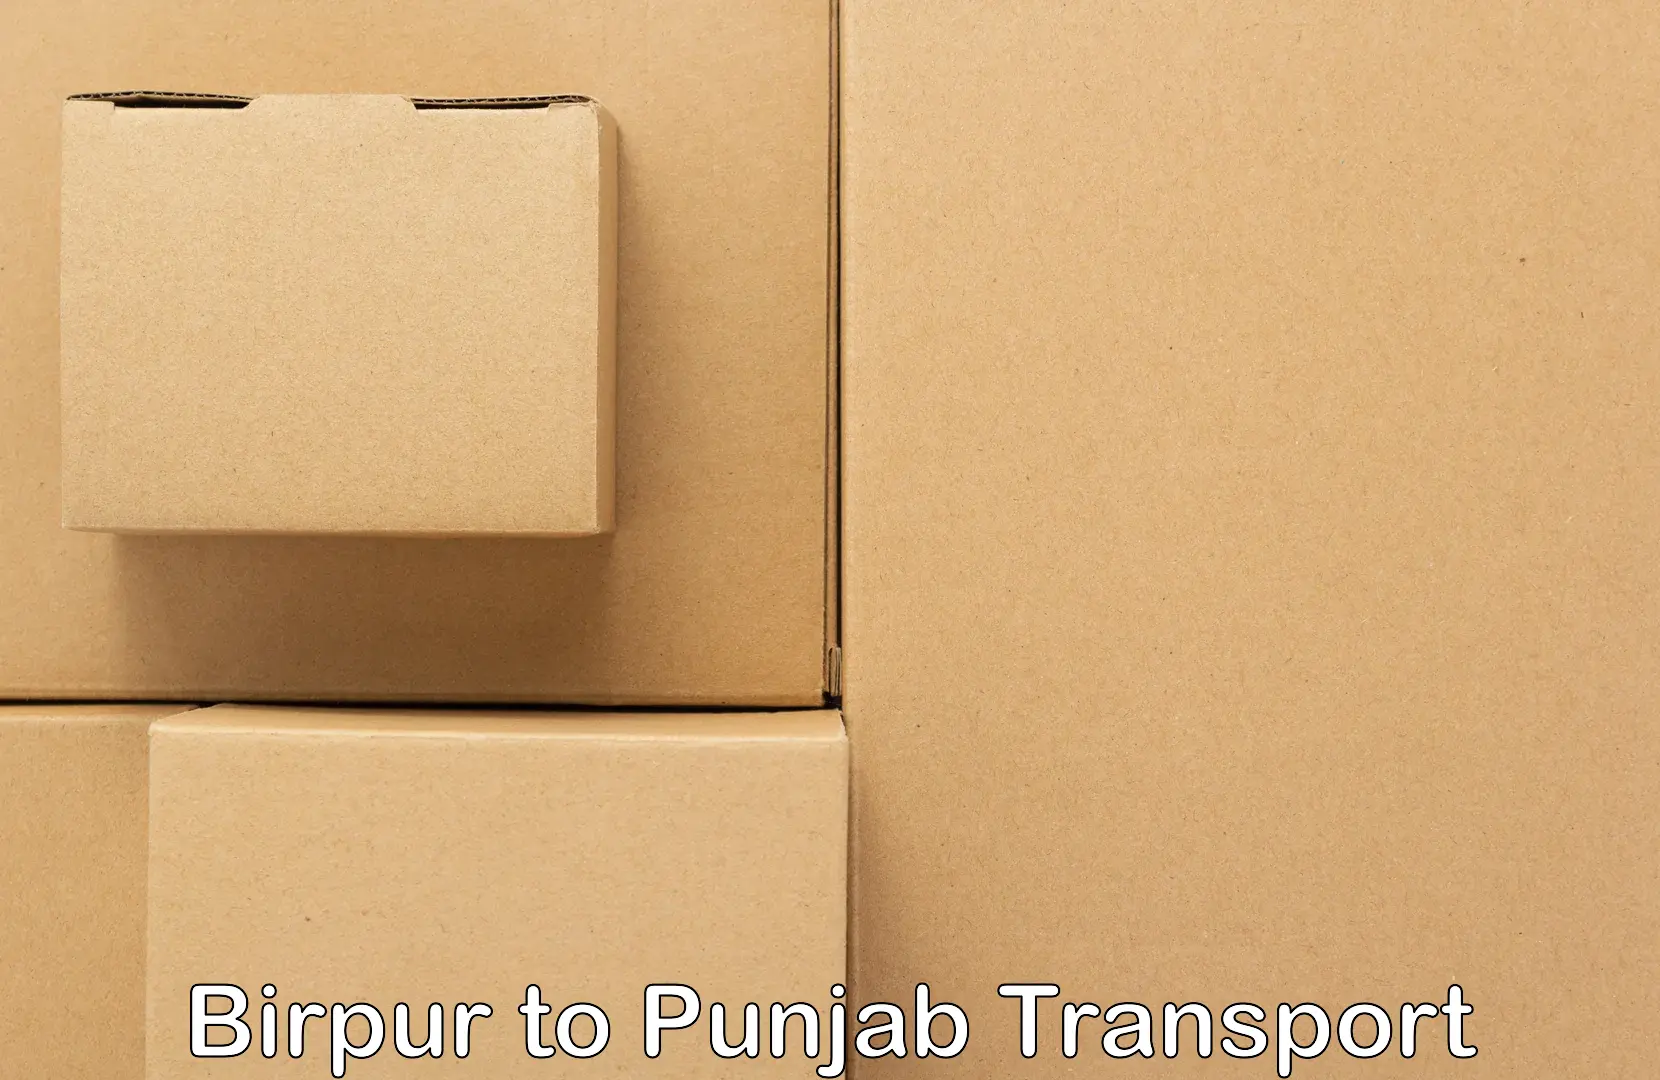 Container transportation services Birpur to Mohali